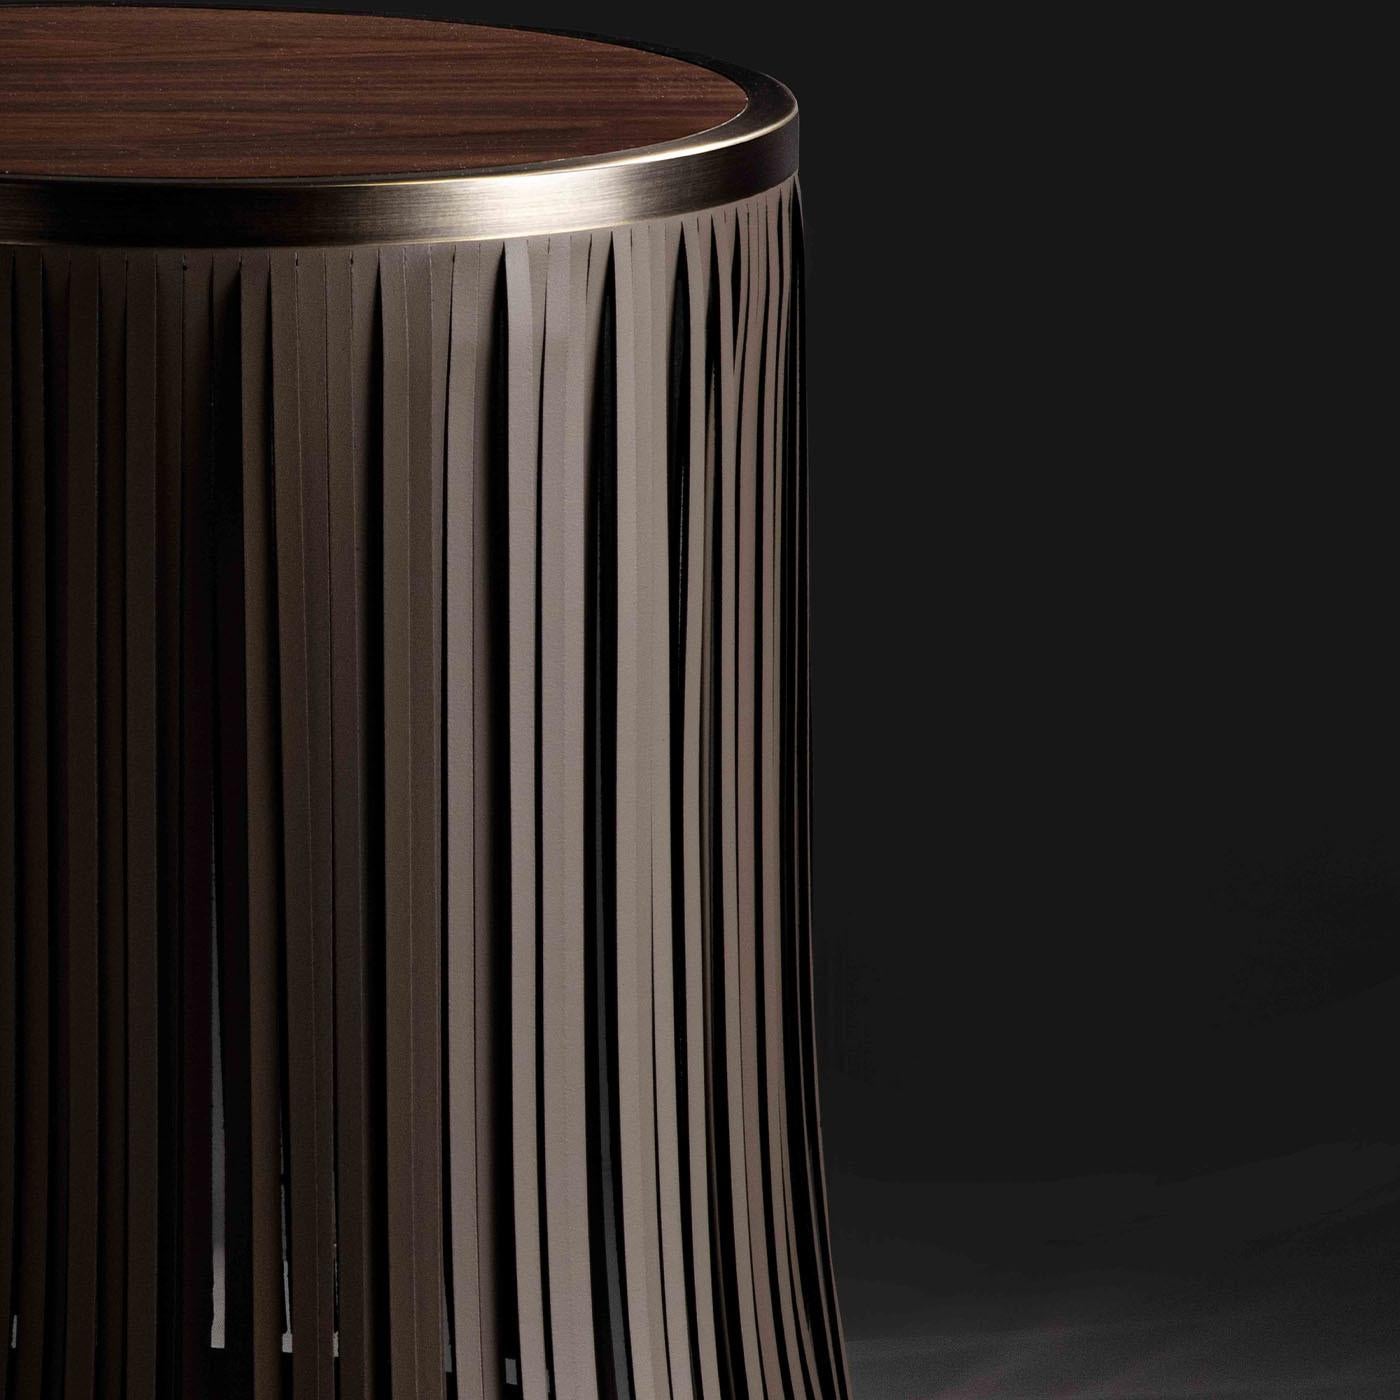 Ringed in brushed brass, the round Canaletto walnut wood top and base of this exquisite side table are graced by a glamorous silver-gray leather fringe that will make a spectacular statement in both minimalist and rustic interiors. A display of